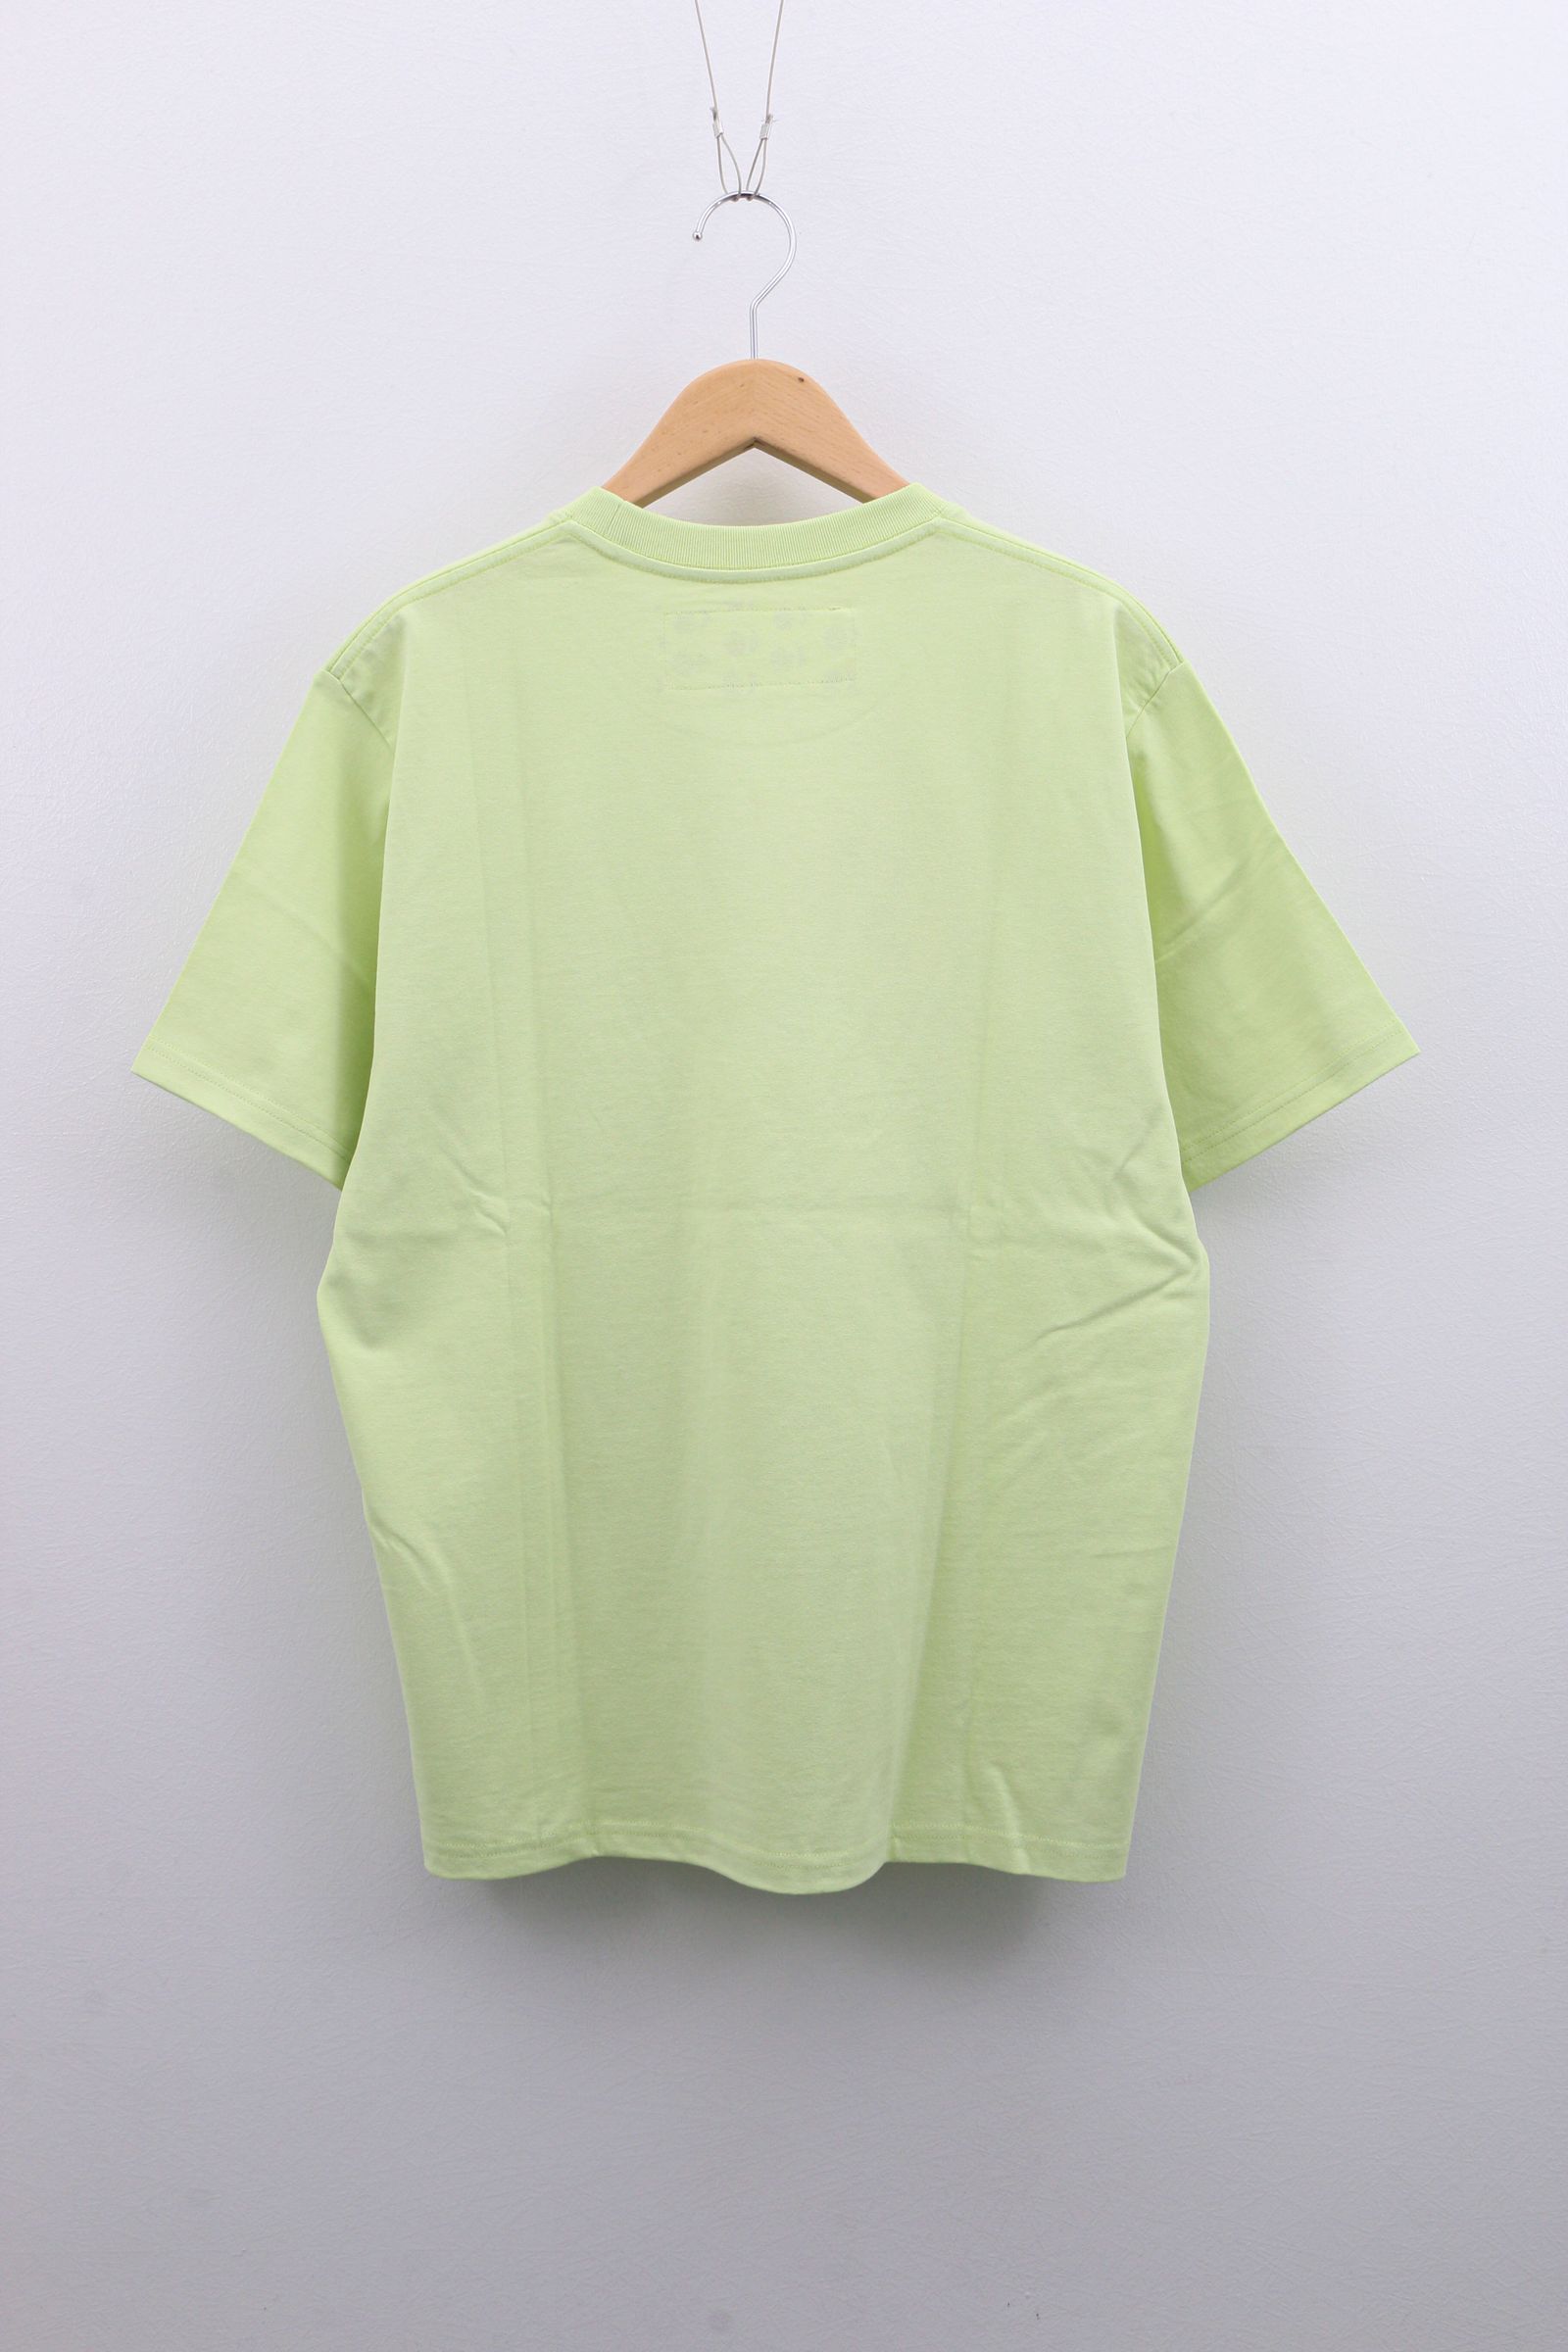 GENTLE FULLNESS - Recycled Cotton SS Tee PISTACHIO DRAGONFLY ...